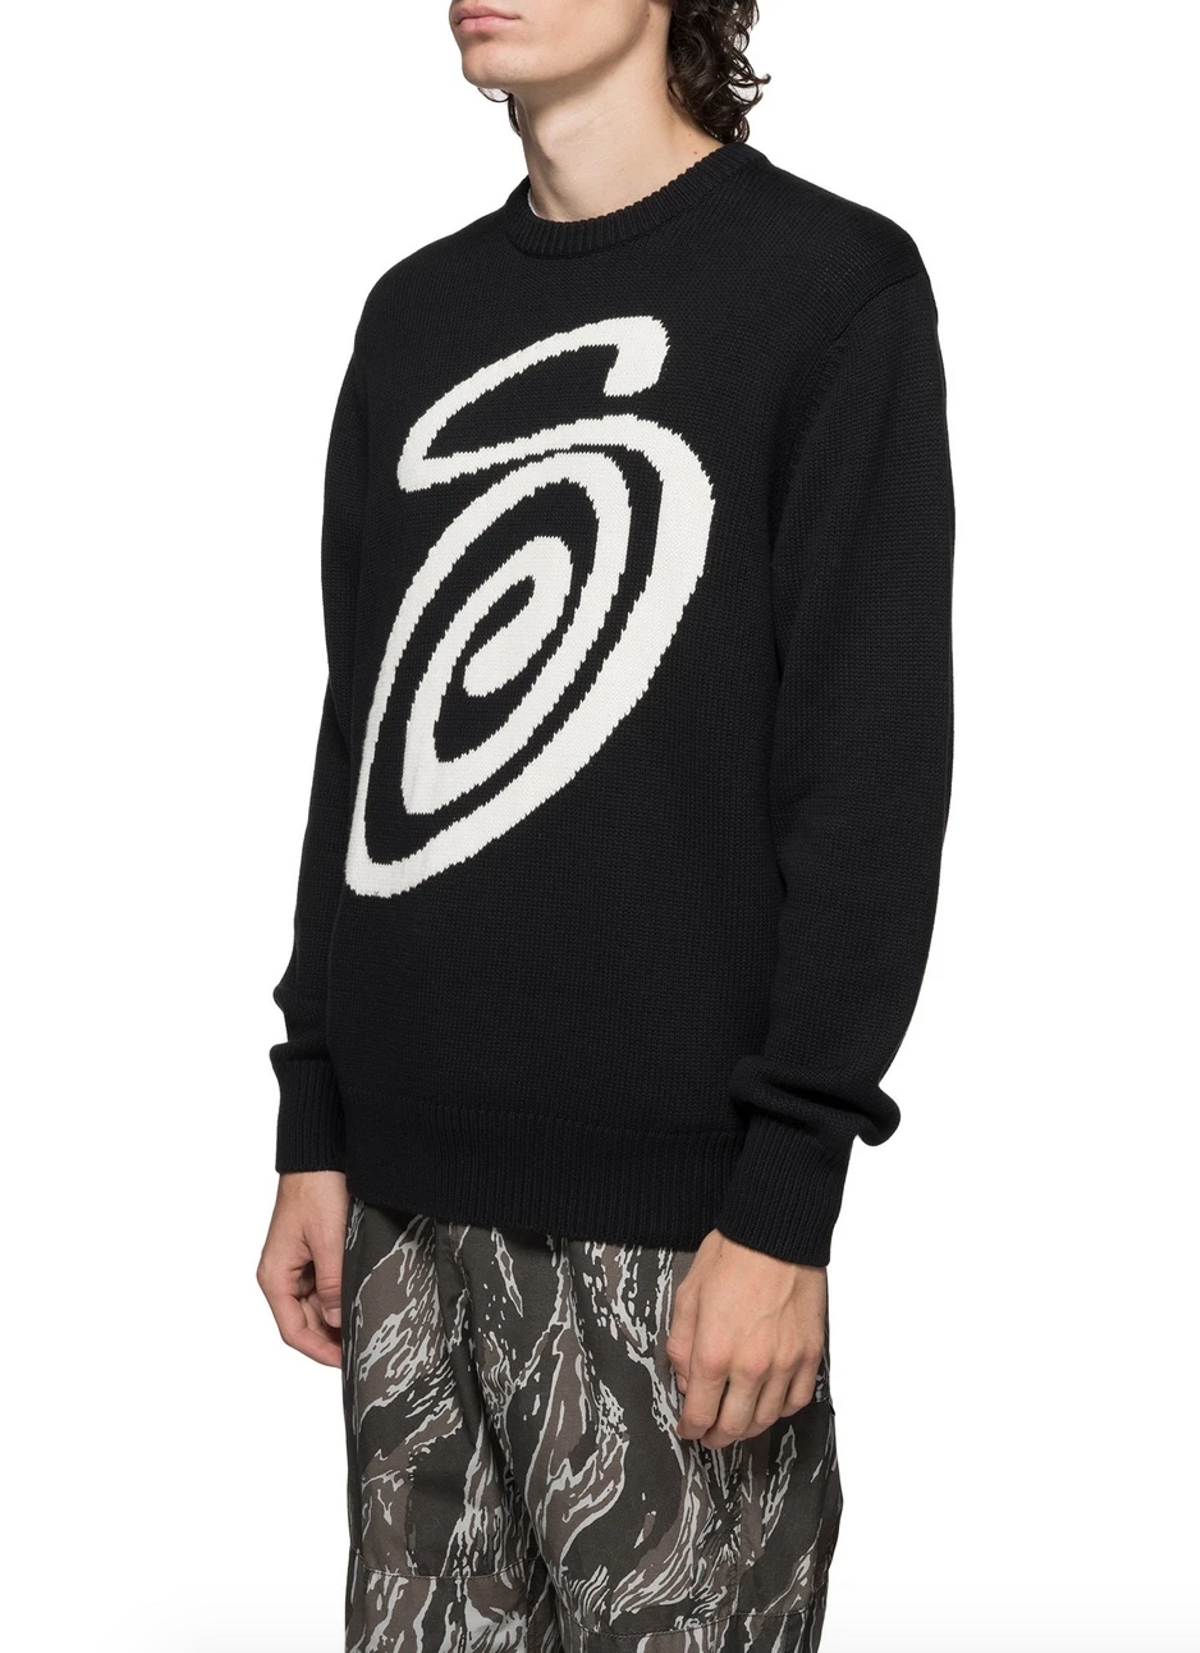 90%OFF!】 Stussy CURLY S SWEATER 